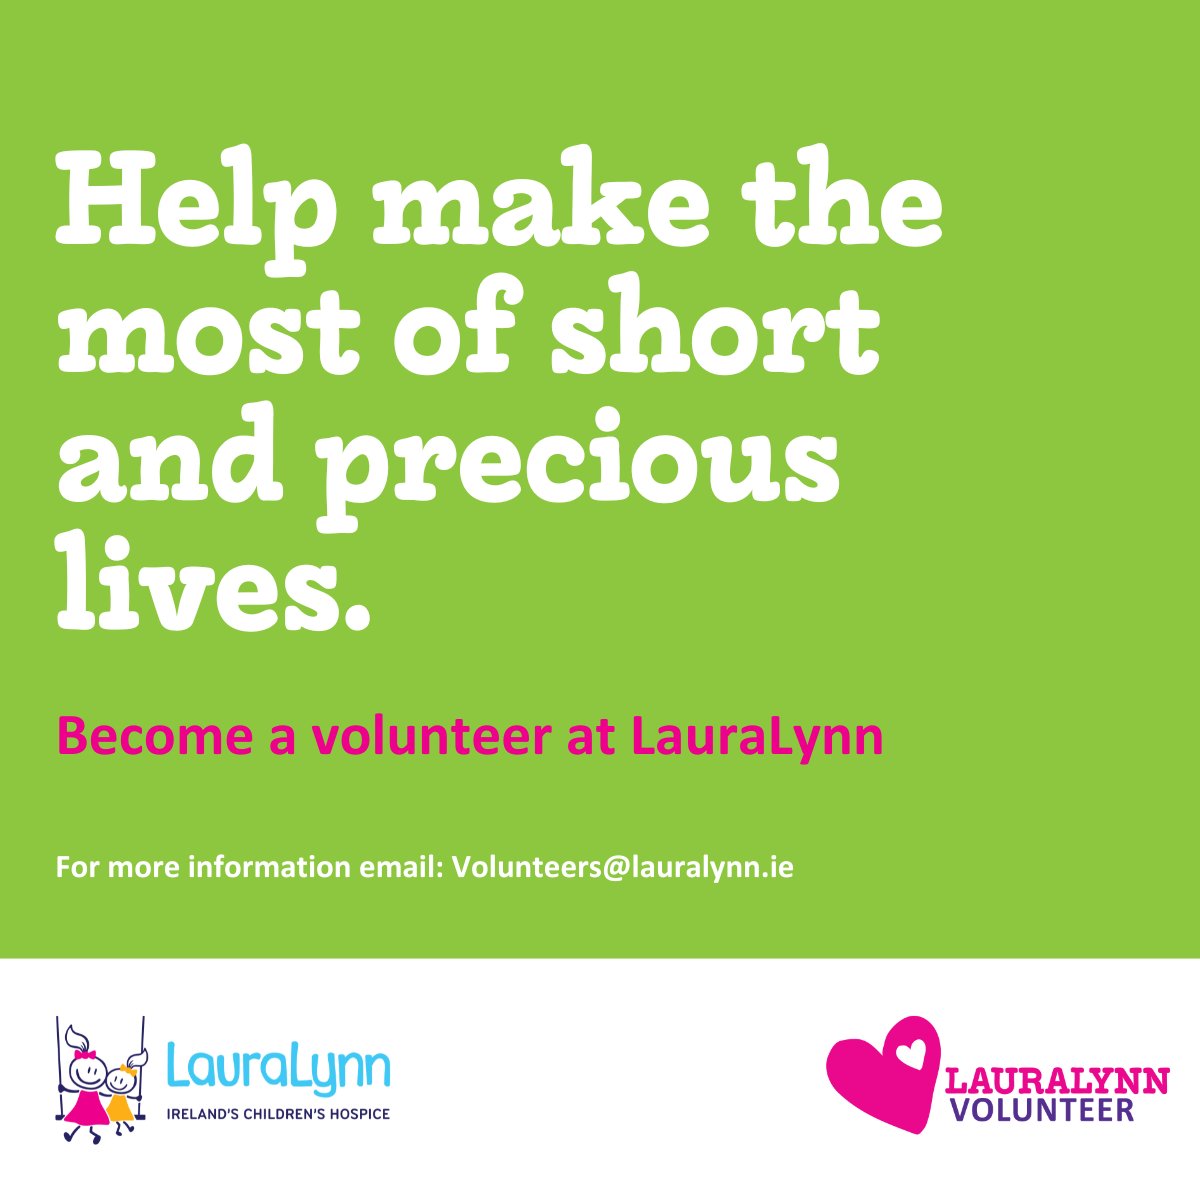 🙌 Hey there! Are you someone looking to make a positive impact? We have some exciting volunteer opportunities available at LauraLynn! 💚 Check out our website for the specific roles we are looking for and apply now. Together, we can make a difference! #volunteer